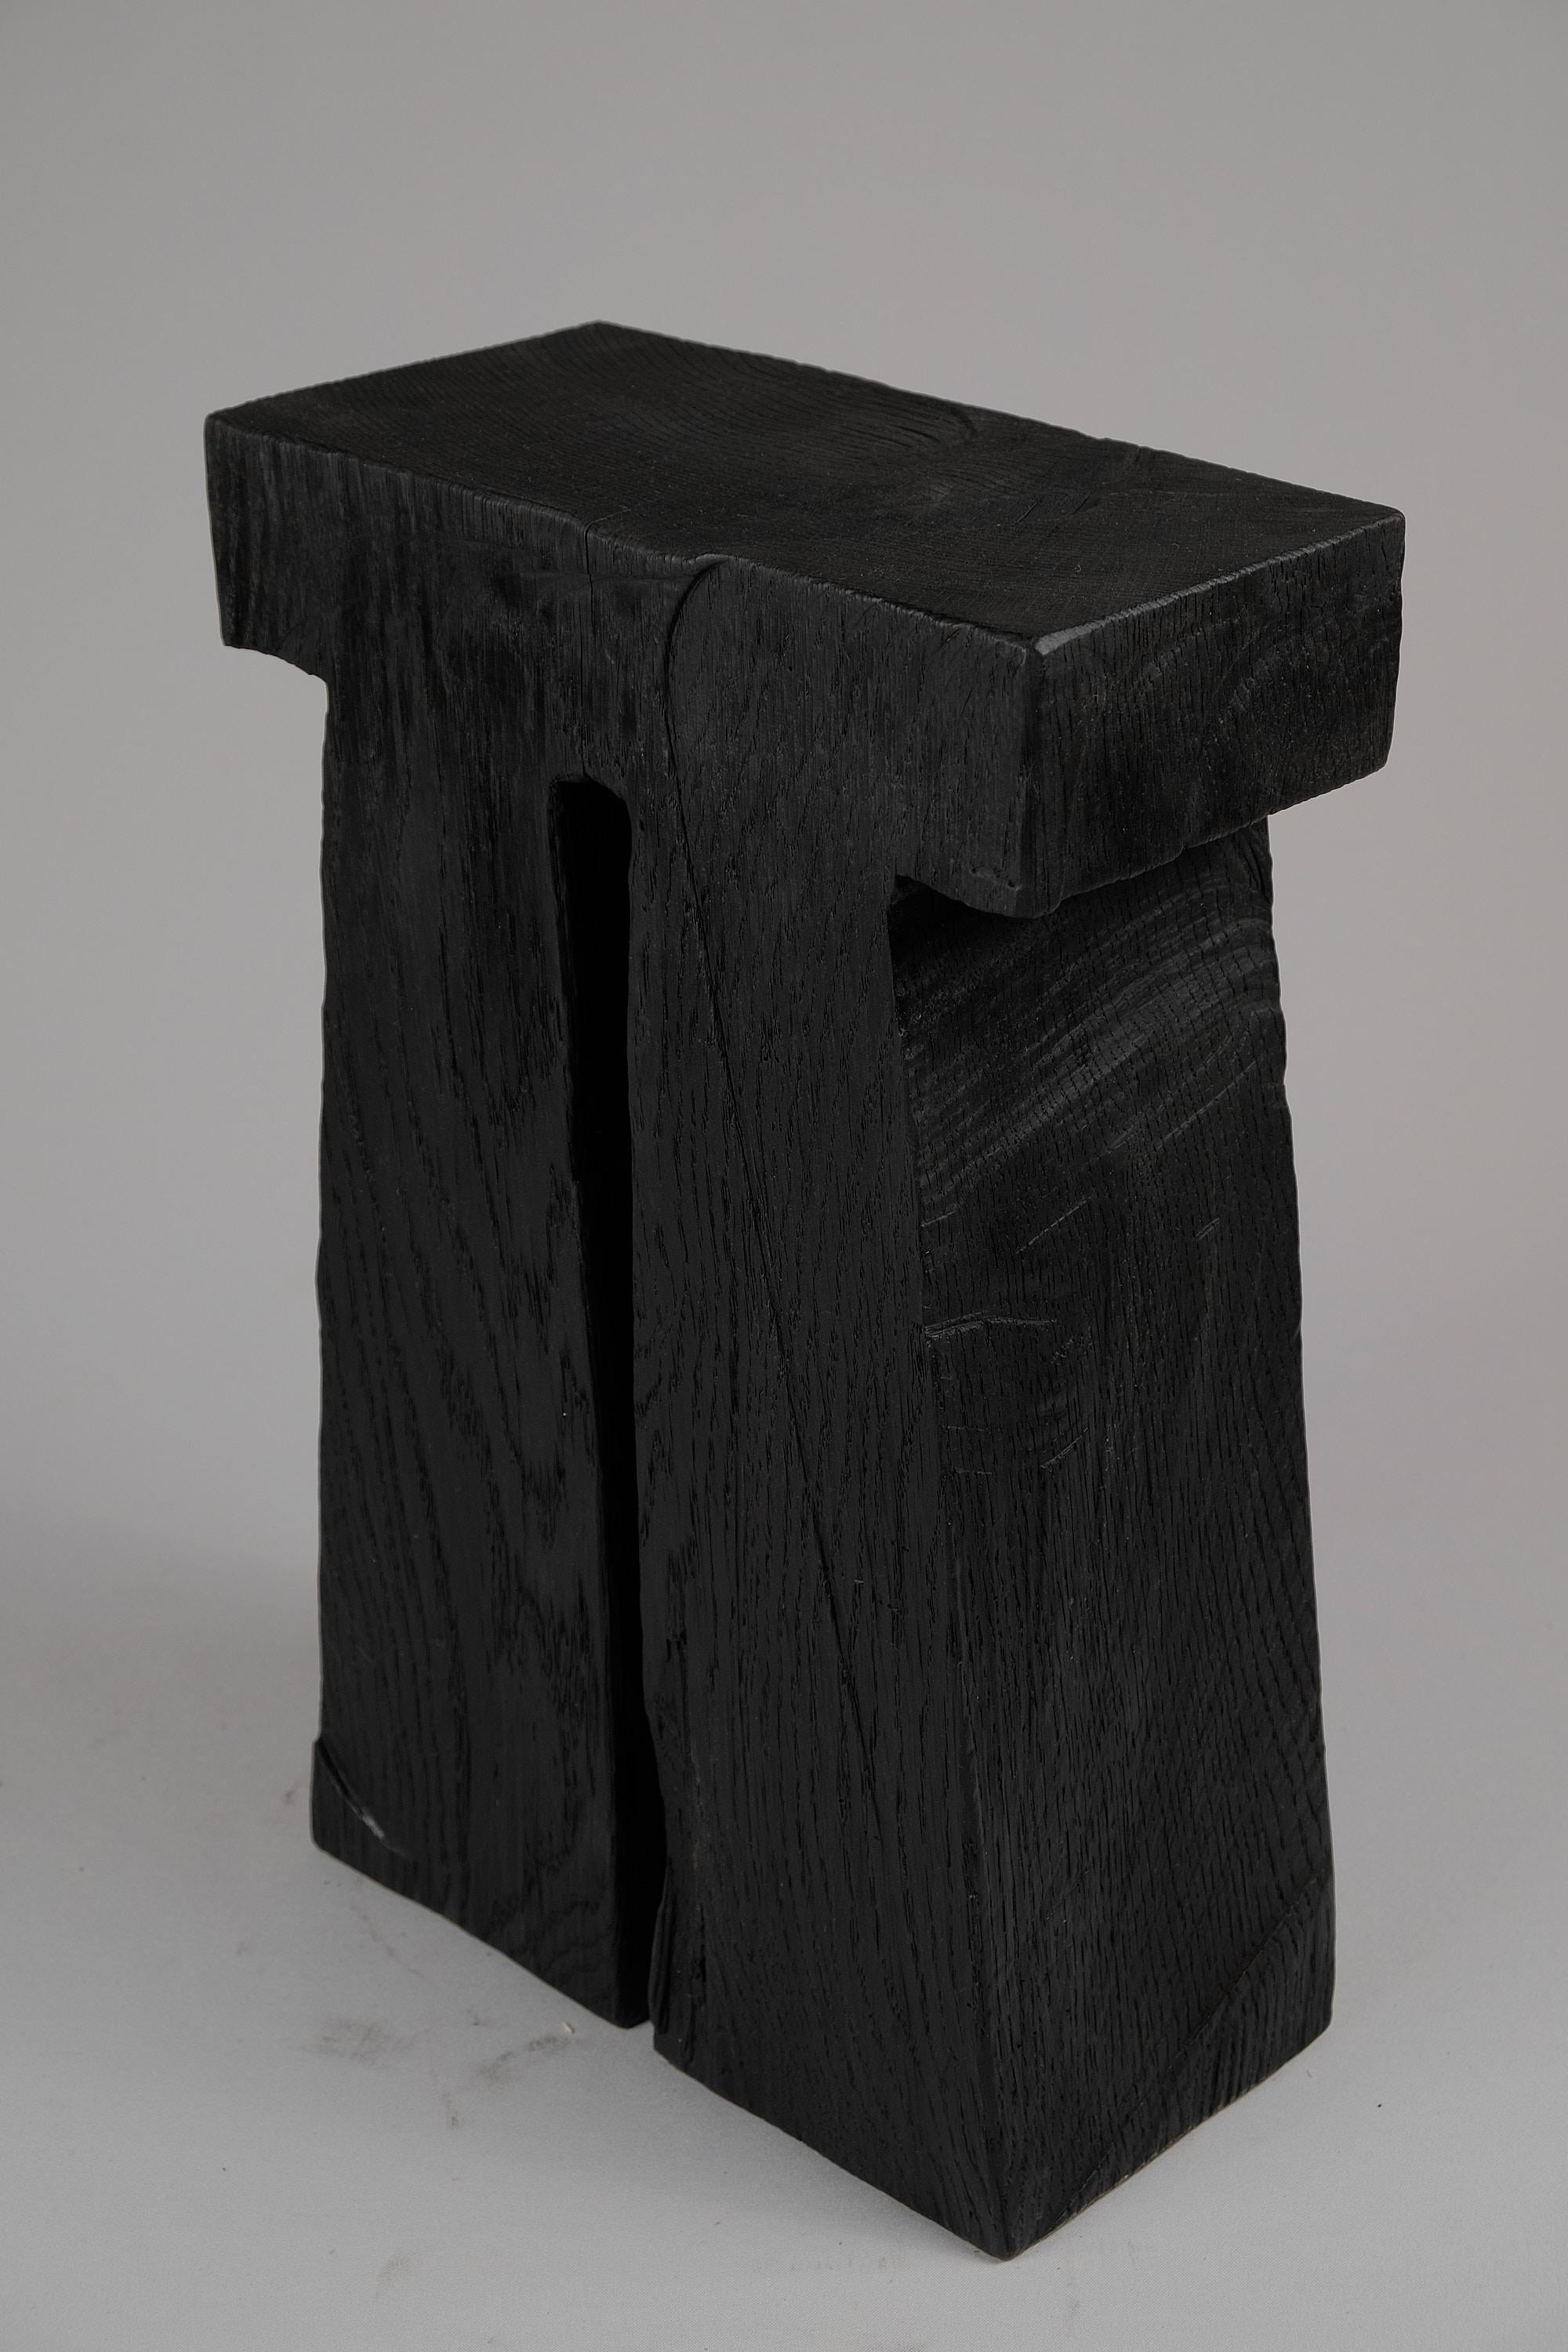 Solid Burnt Wood, Side Table, Stool, Original Contemporary Design, Logniture In New Condition For Sale In Stara Gradiška, HR